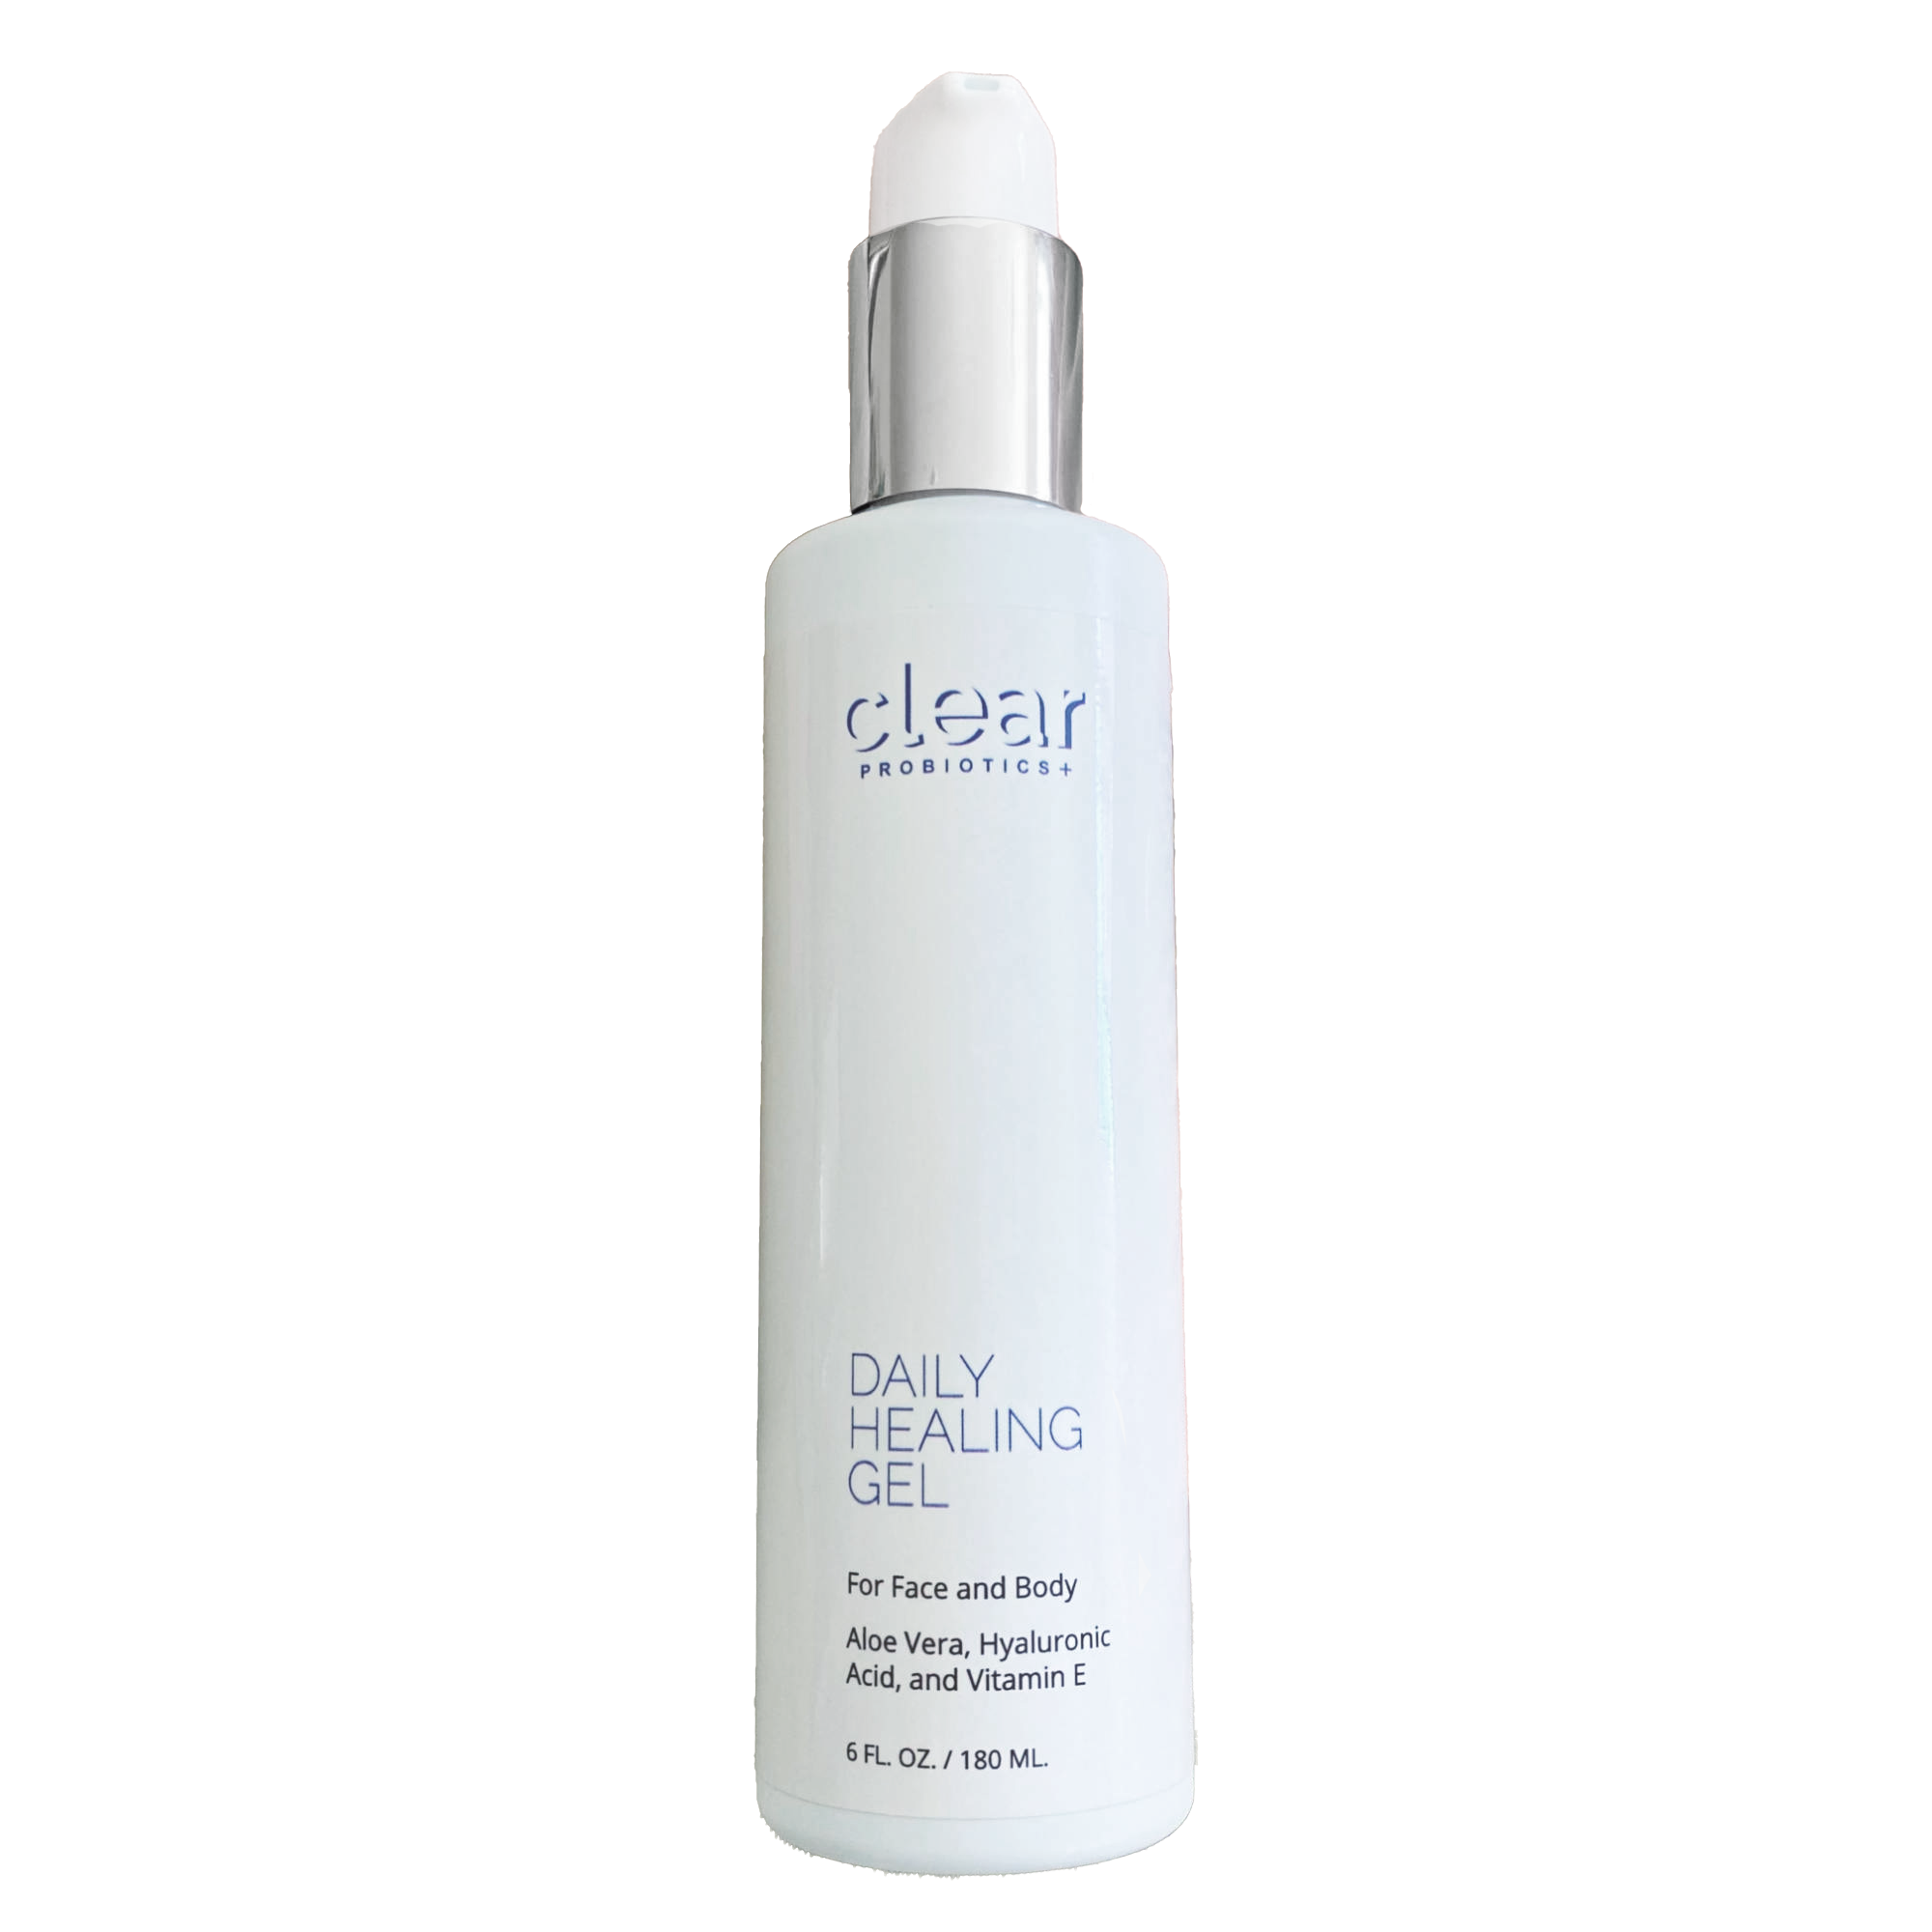 Clear Daily Healing Gel refreshes and repairs skin